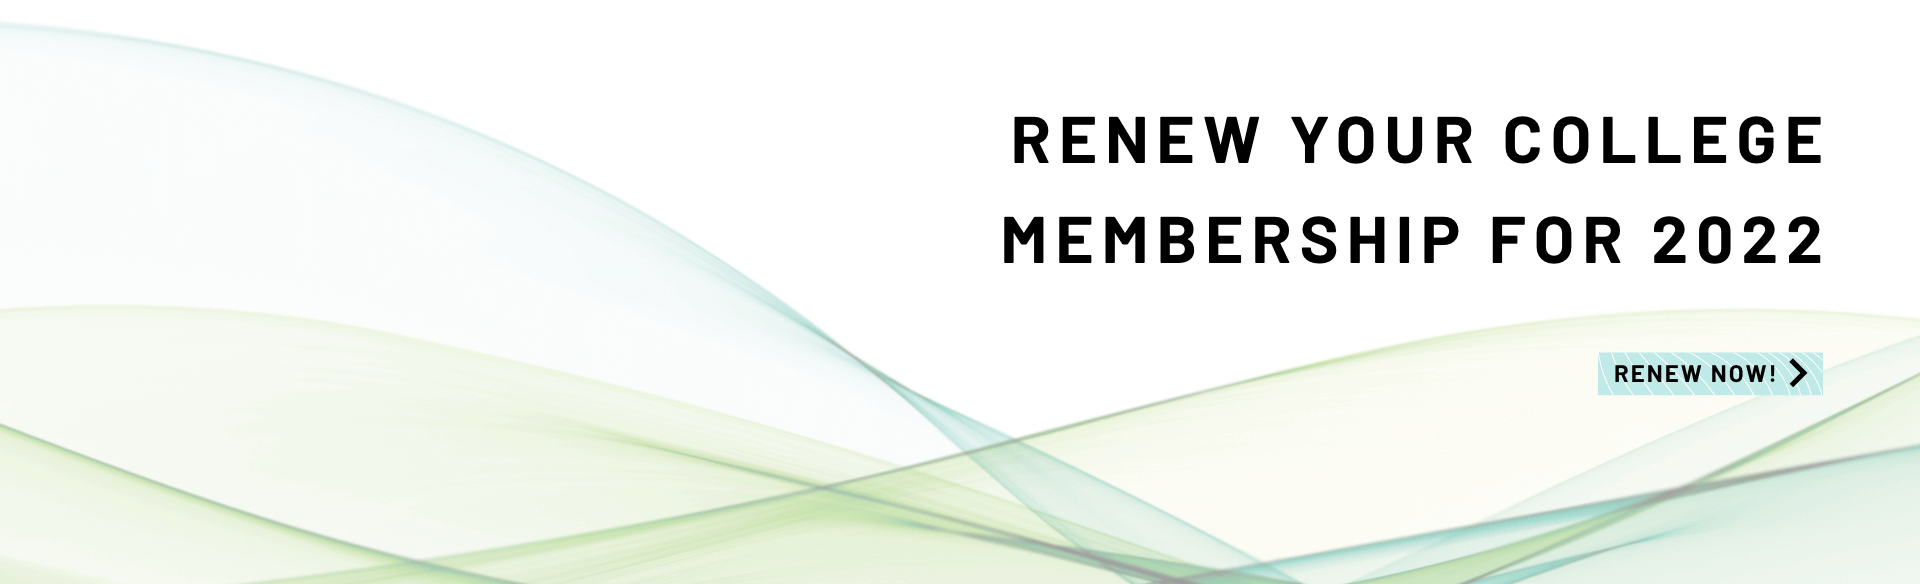 Renew your college membership for 2022